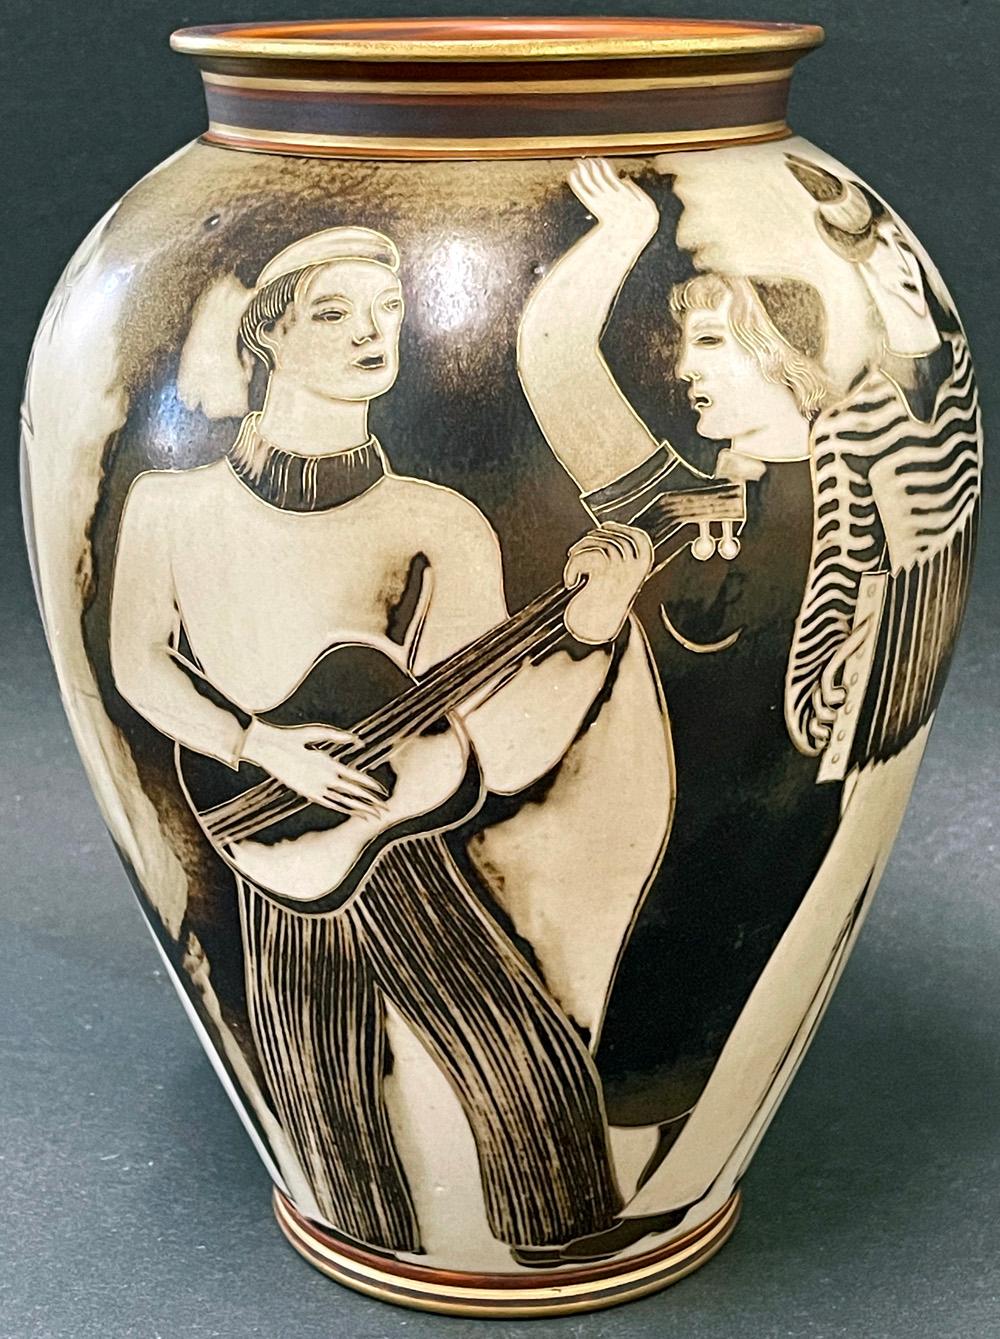 Perhaps the finest and most ambitious Flambé porcelain by Gunnar Nylund we have ever offered, this remarkable vase depicts a frieze-like array of sailors on the waterfront, all playing instruments and accompanied by young women clothed in the latest